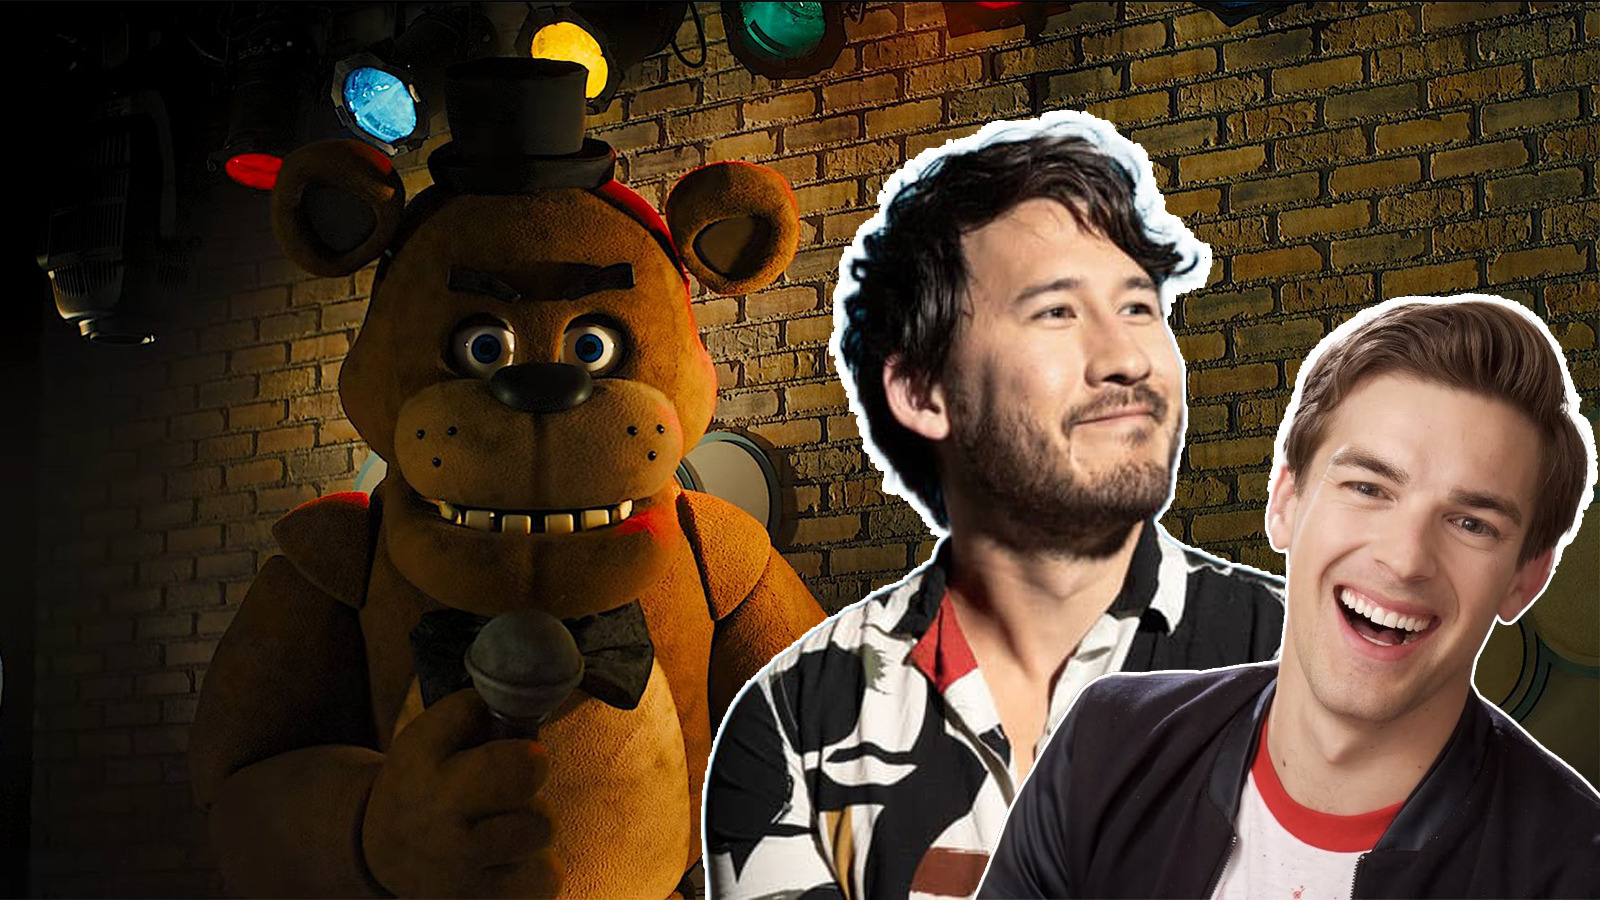 The Two YouTubers Five Nights At Freddy's Fans Hope Are In The Film